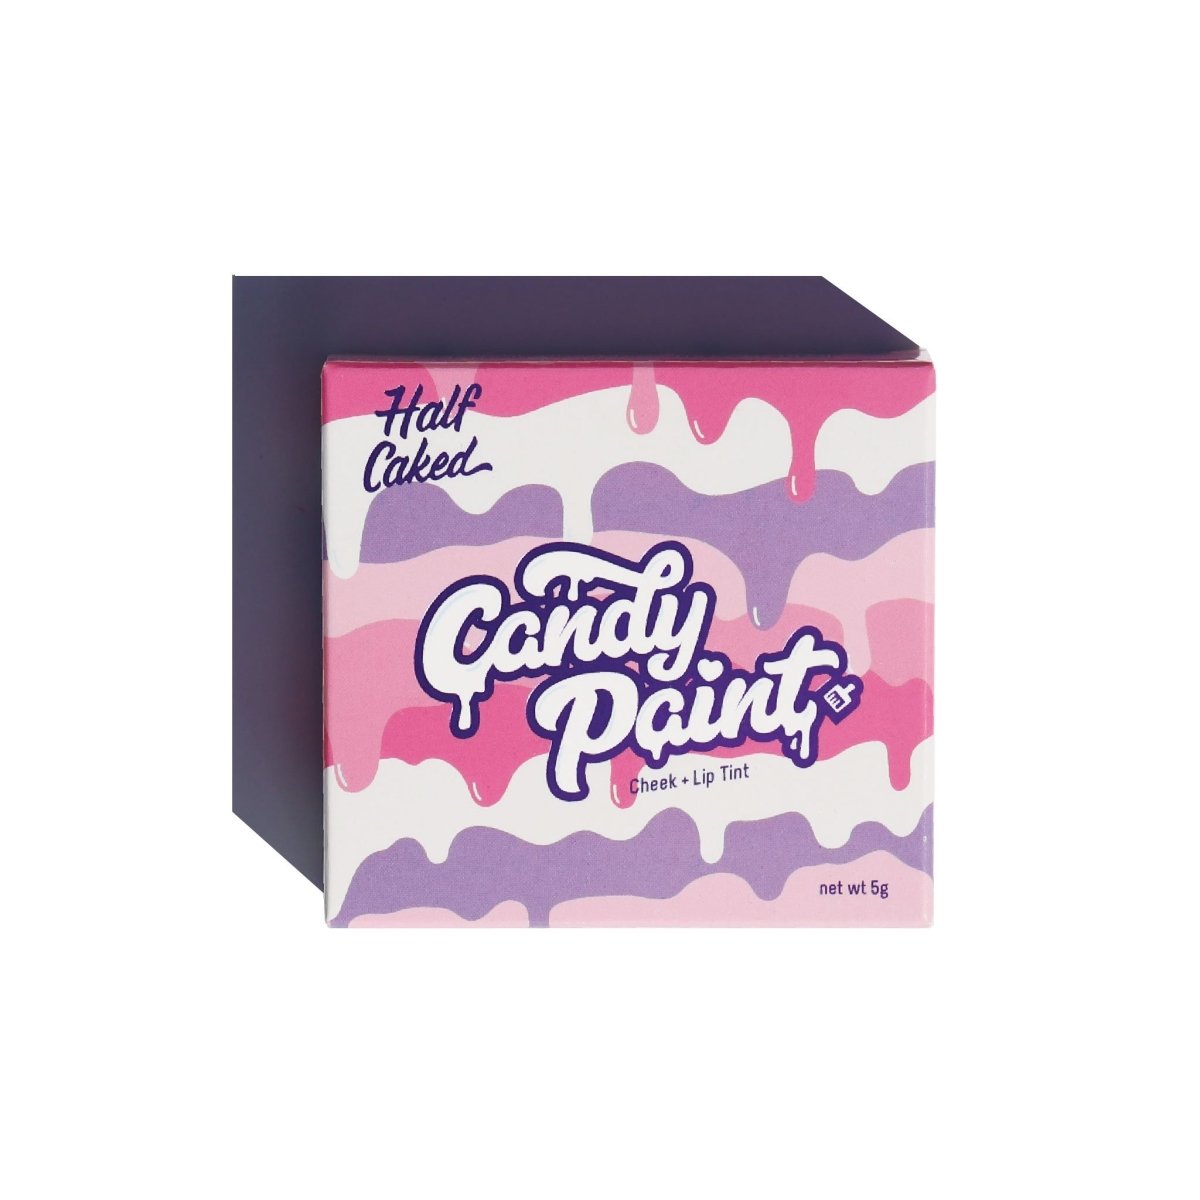 pink white purple box with candy paint on front - Instant Cheekbones Set - Half Caked